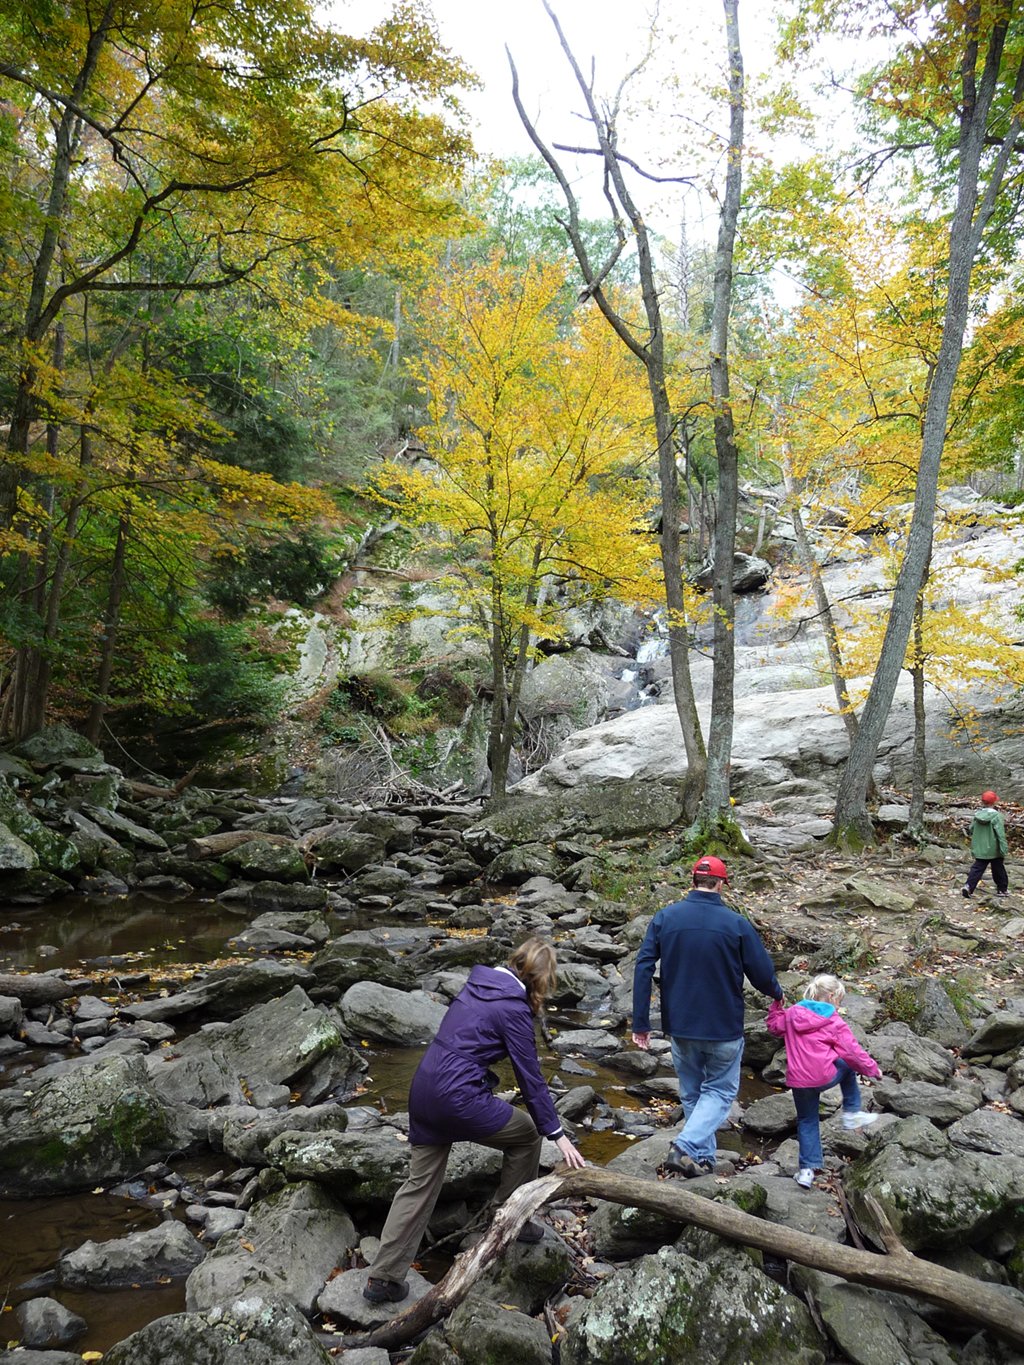 great hikes near dc